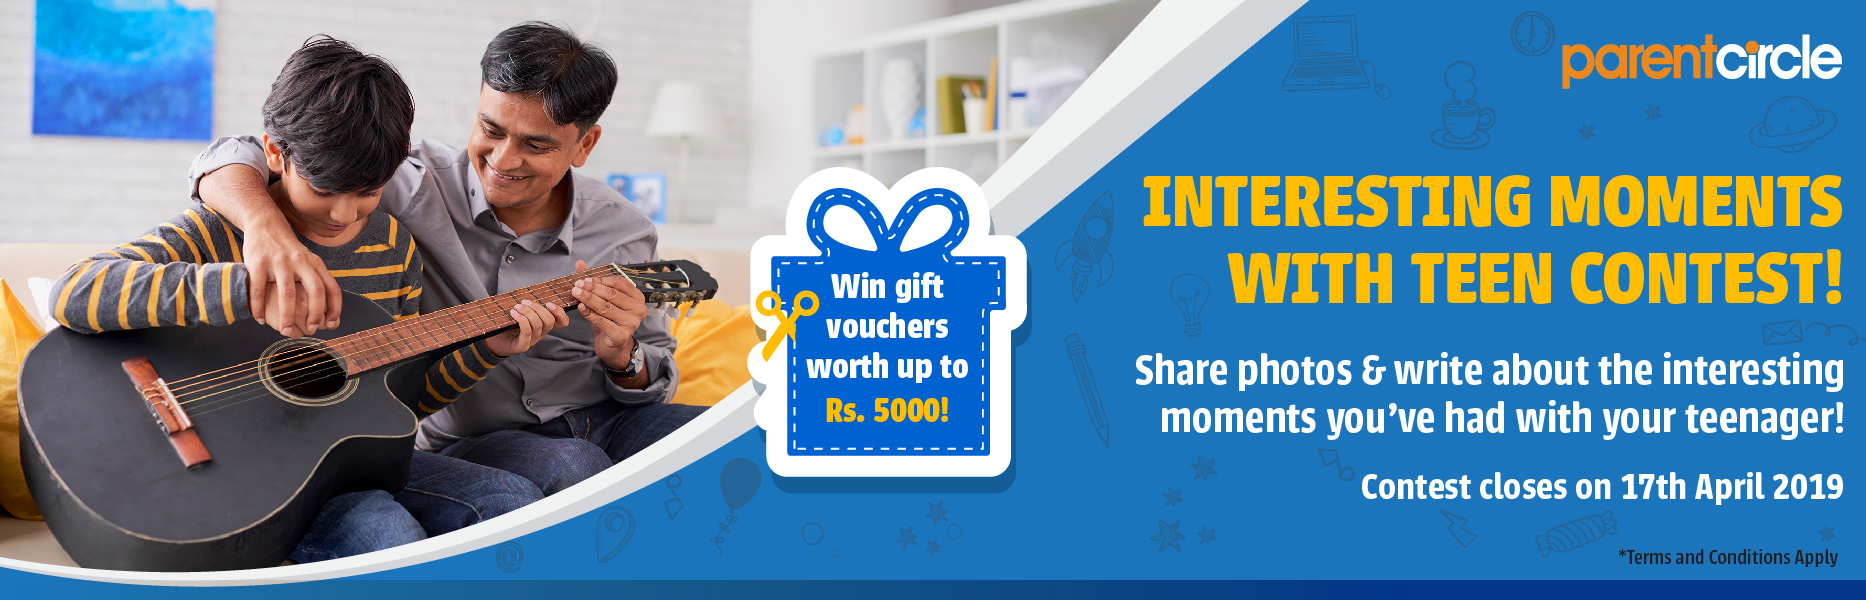 CONTEST ALERT - Interesting Moments with Teen Contest